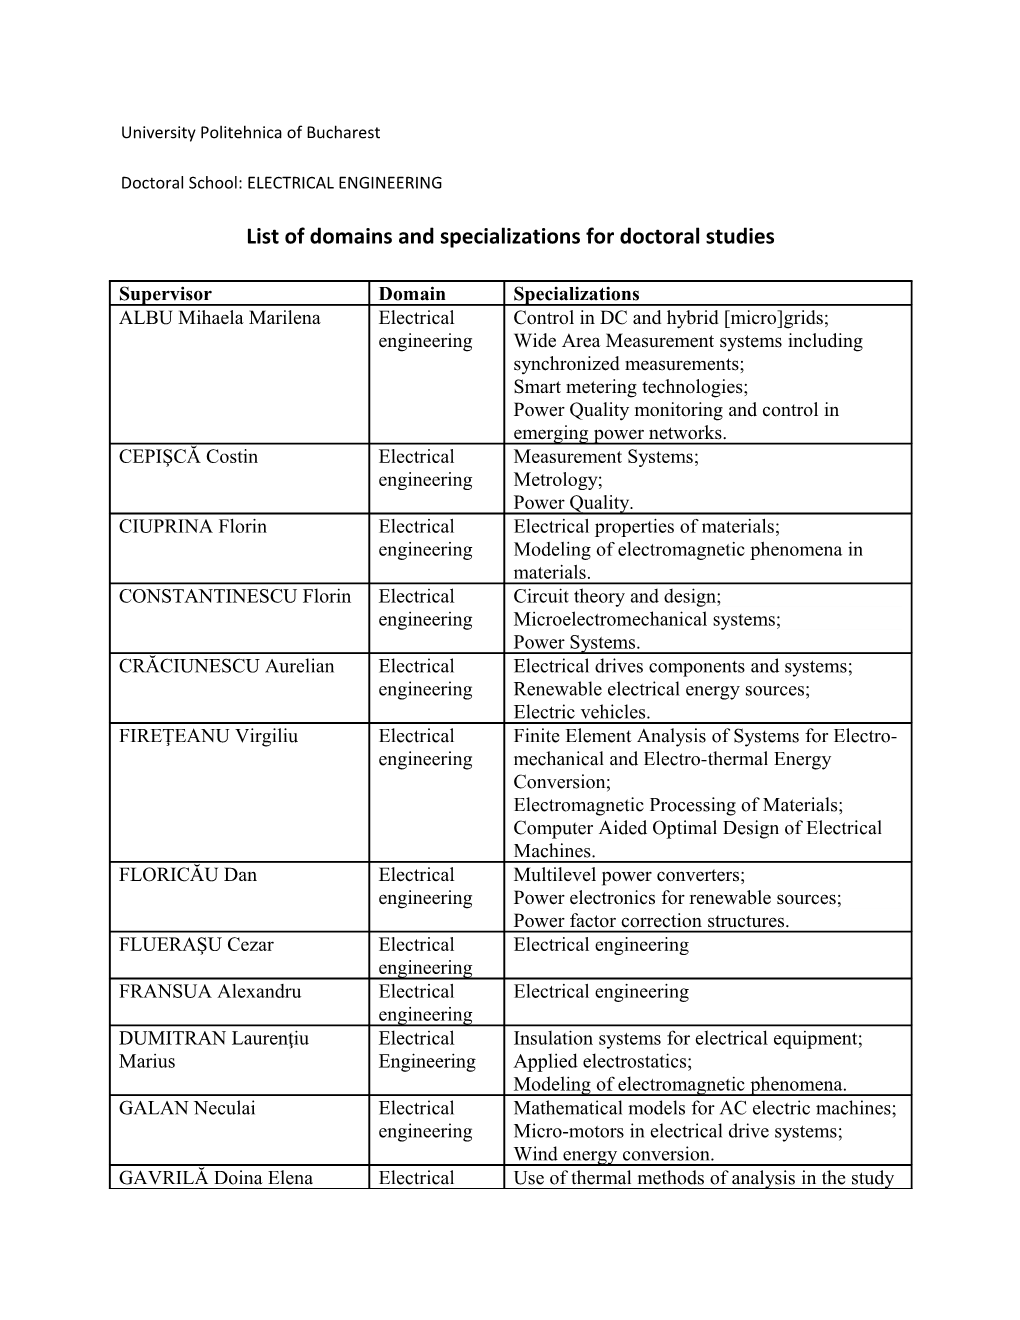 List of Domains and Specializations for Doctoral Studies